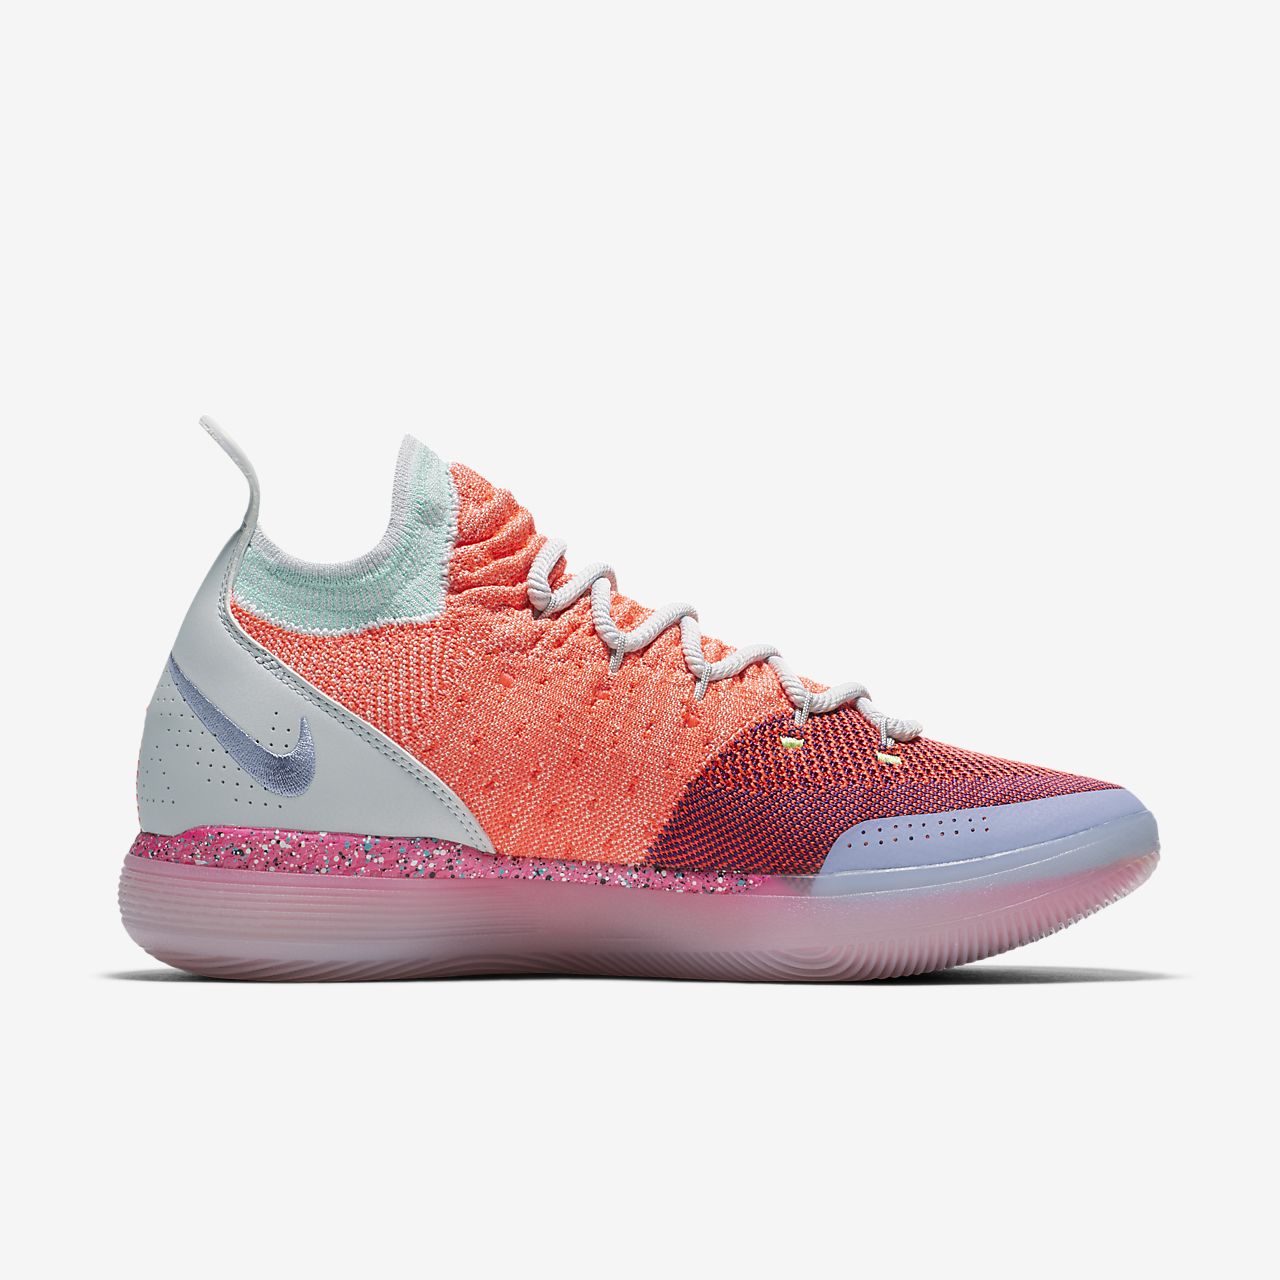 nike zoom kd 11 Kevin Durant shoes on sale